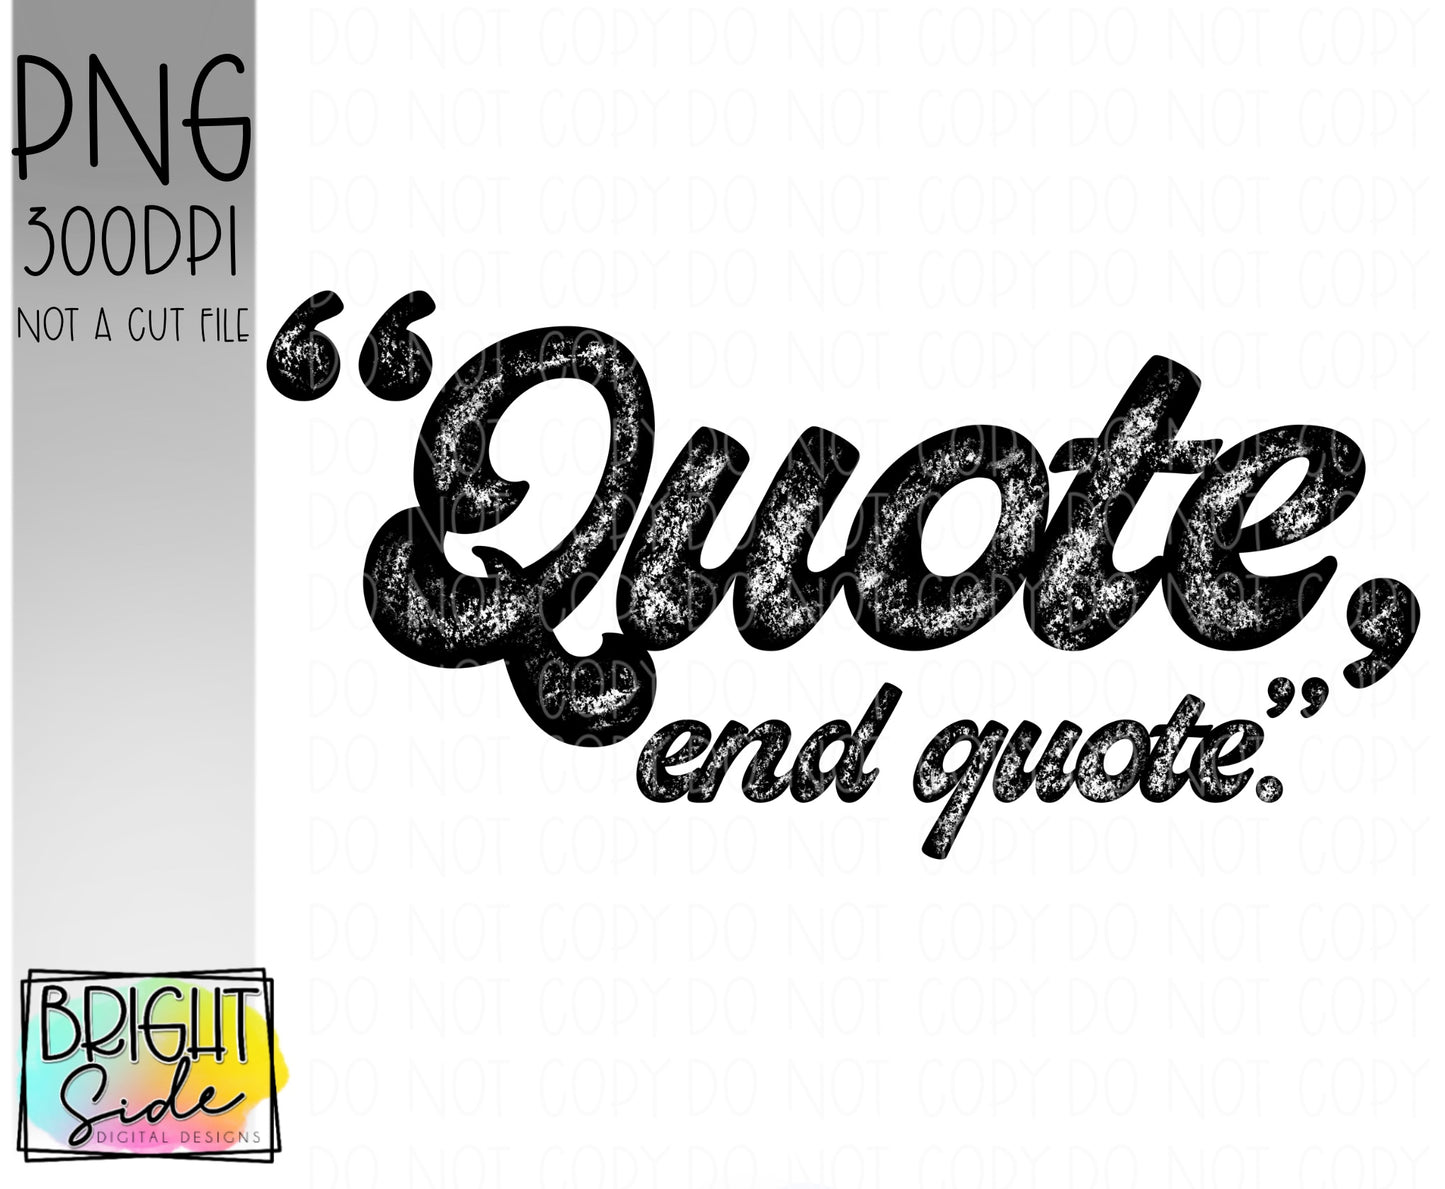 “Quote end quote”